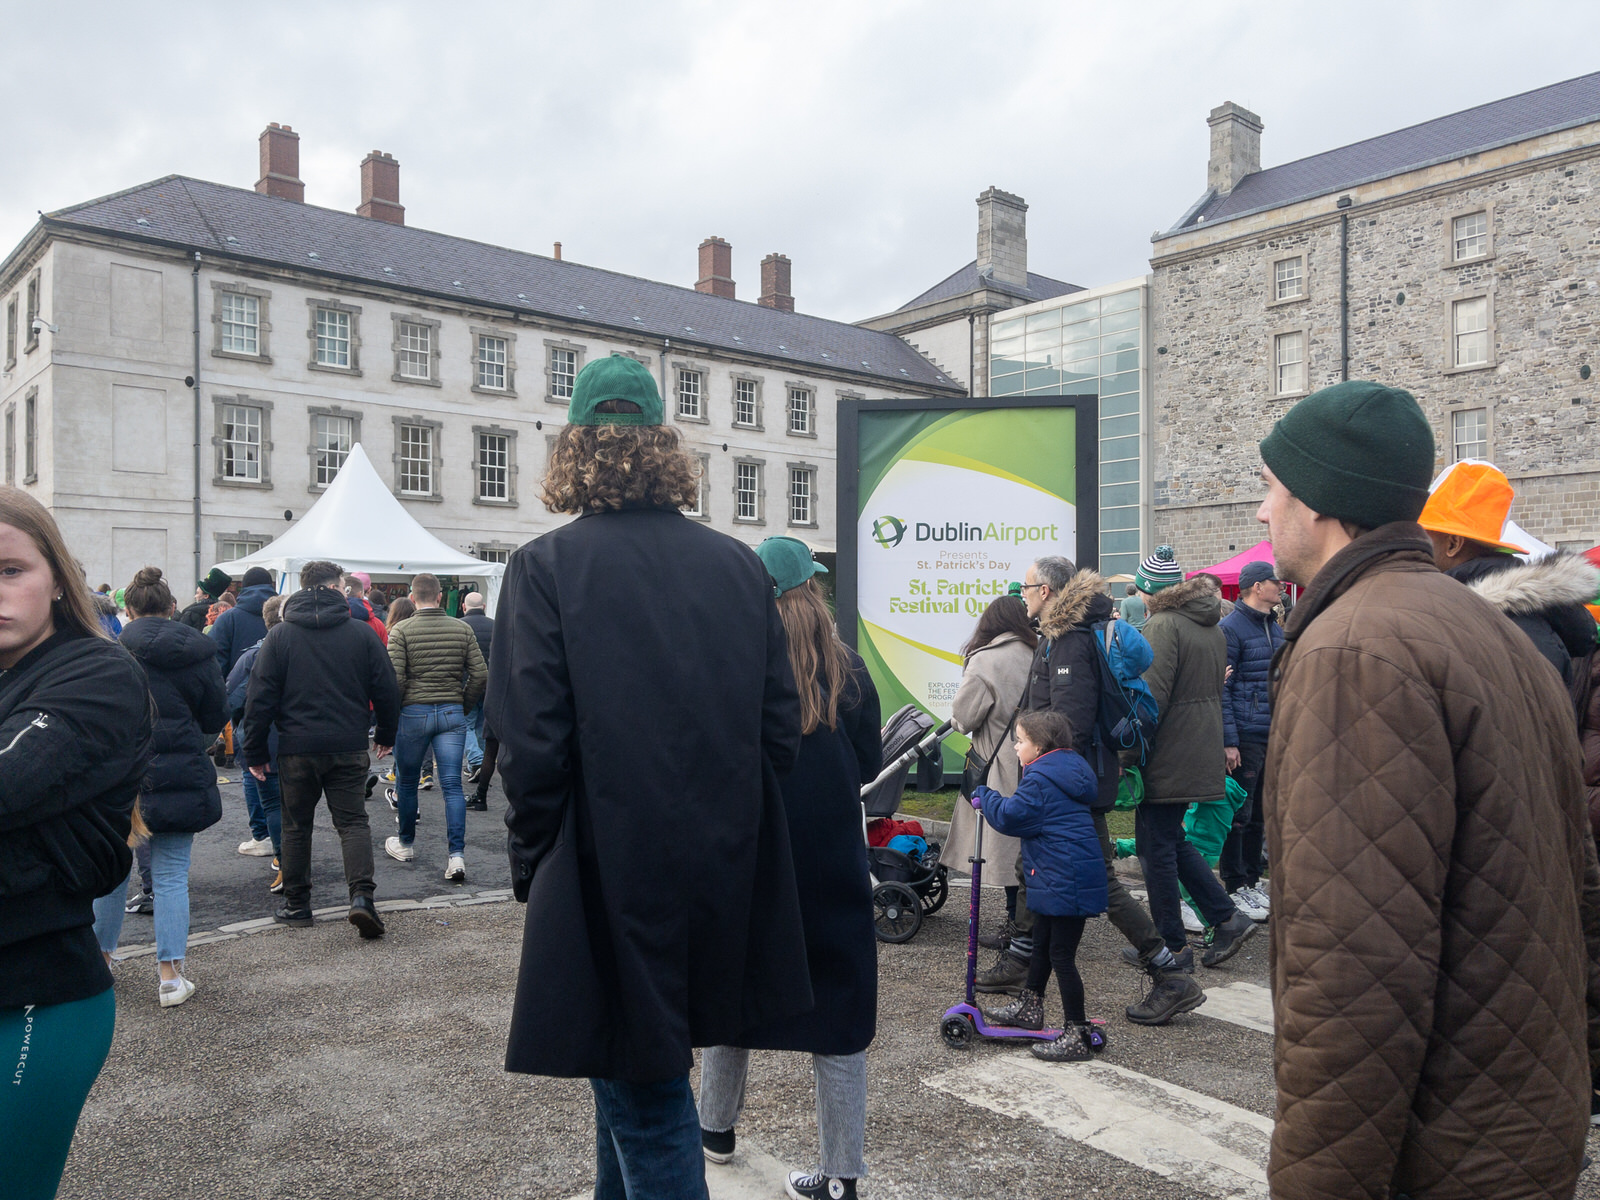  ST. PATRICK'S FESTIVAL QUARTER AT THE NATIONAL MUSEUM OF IRELAND